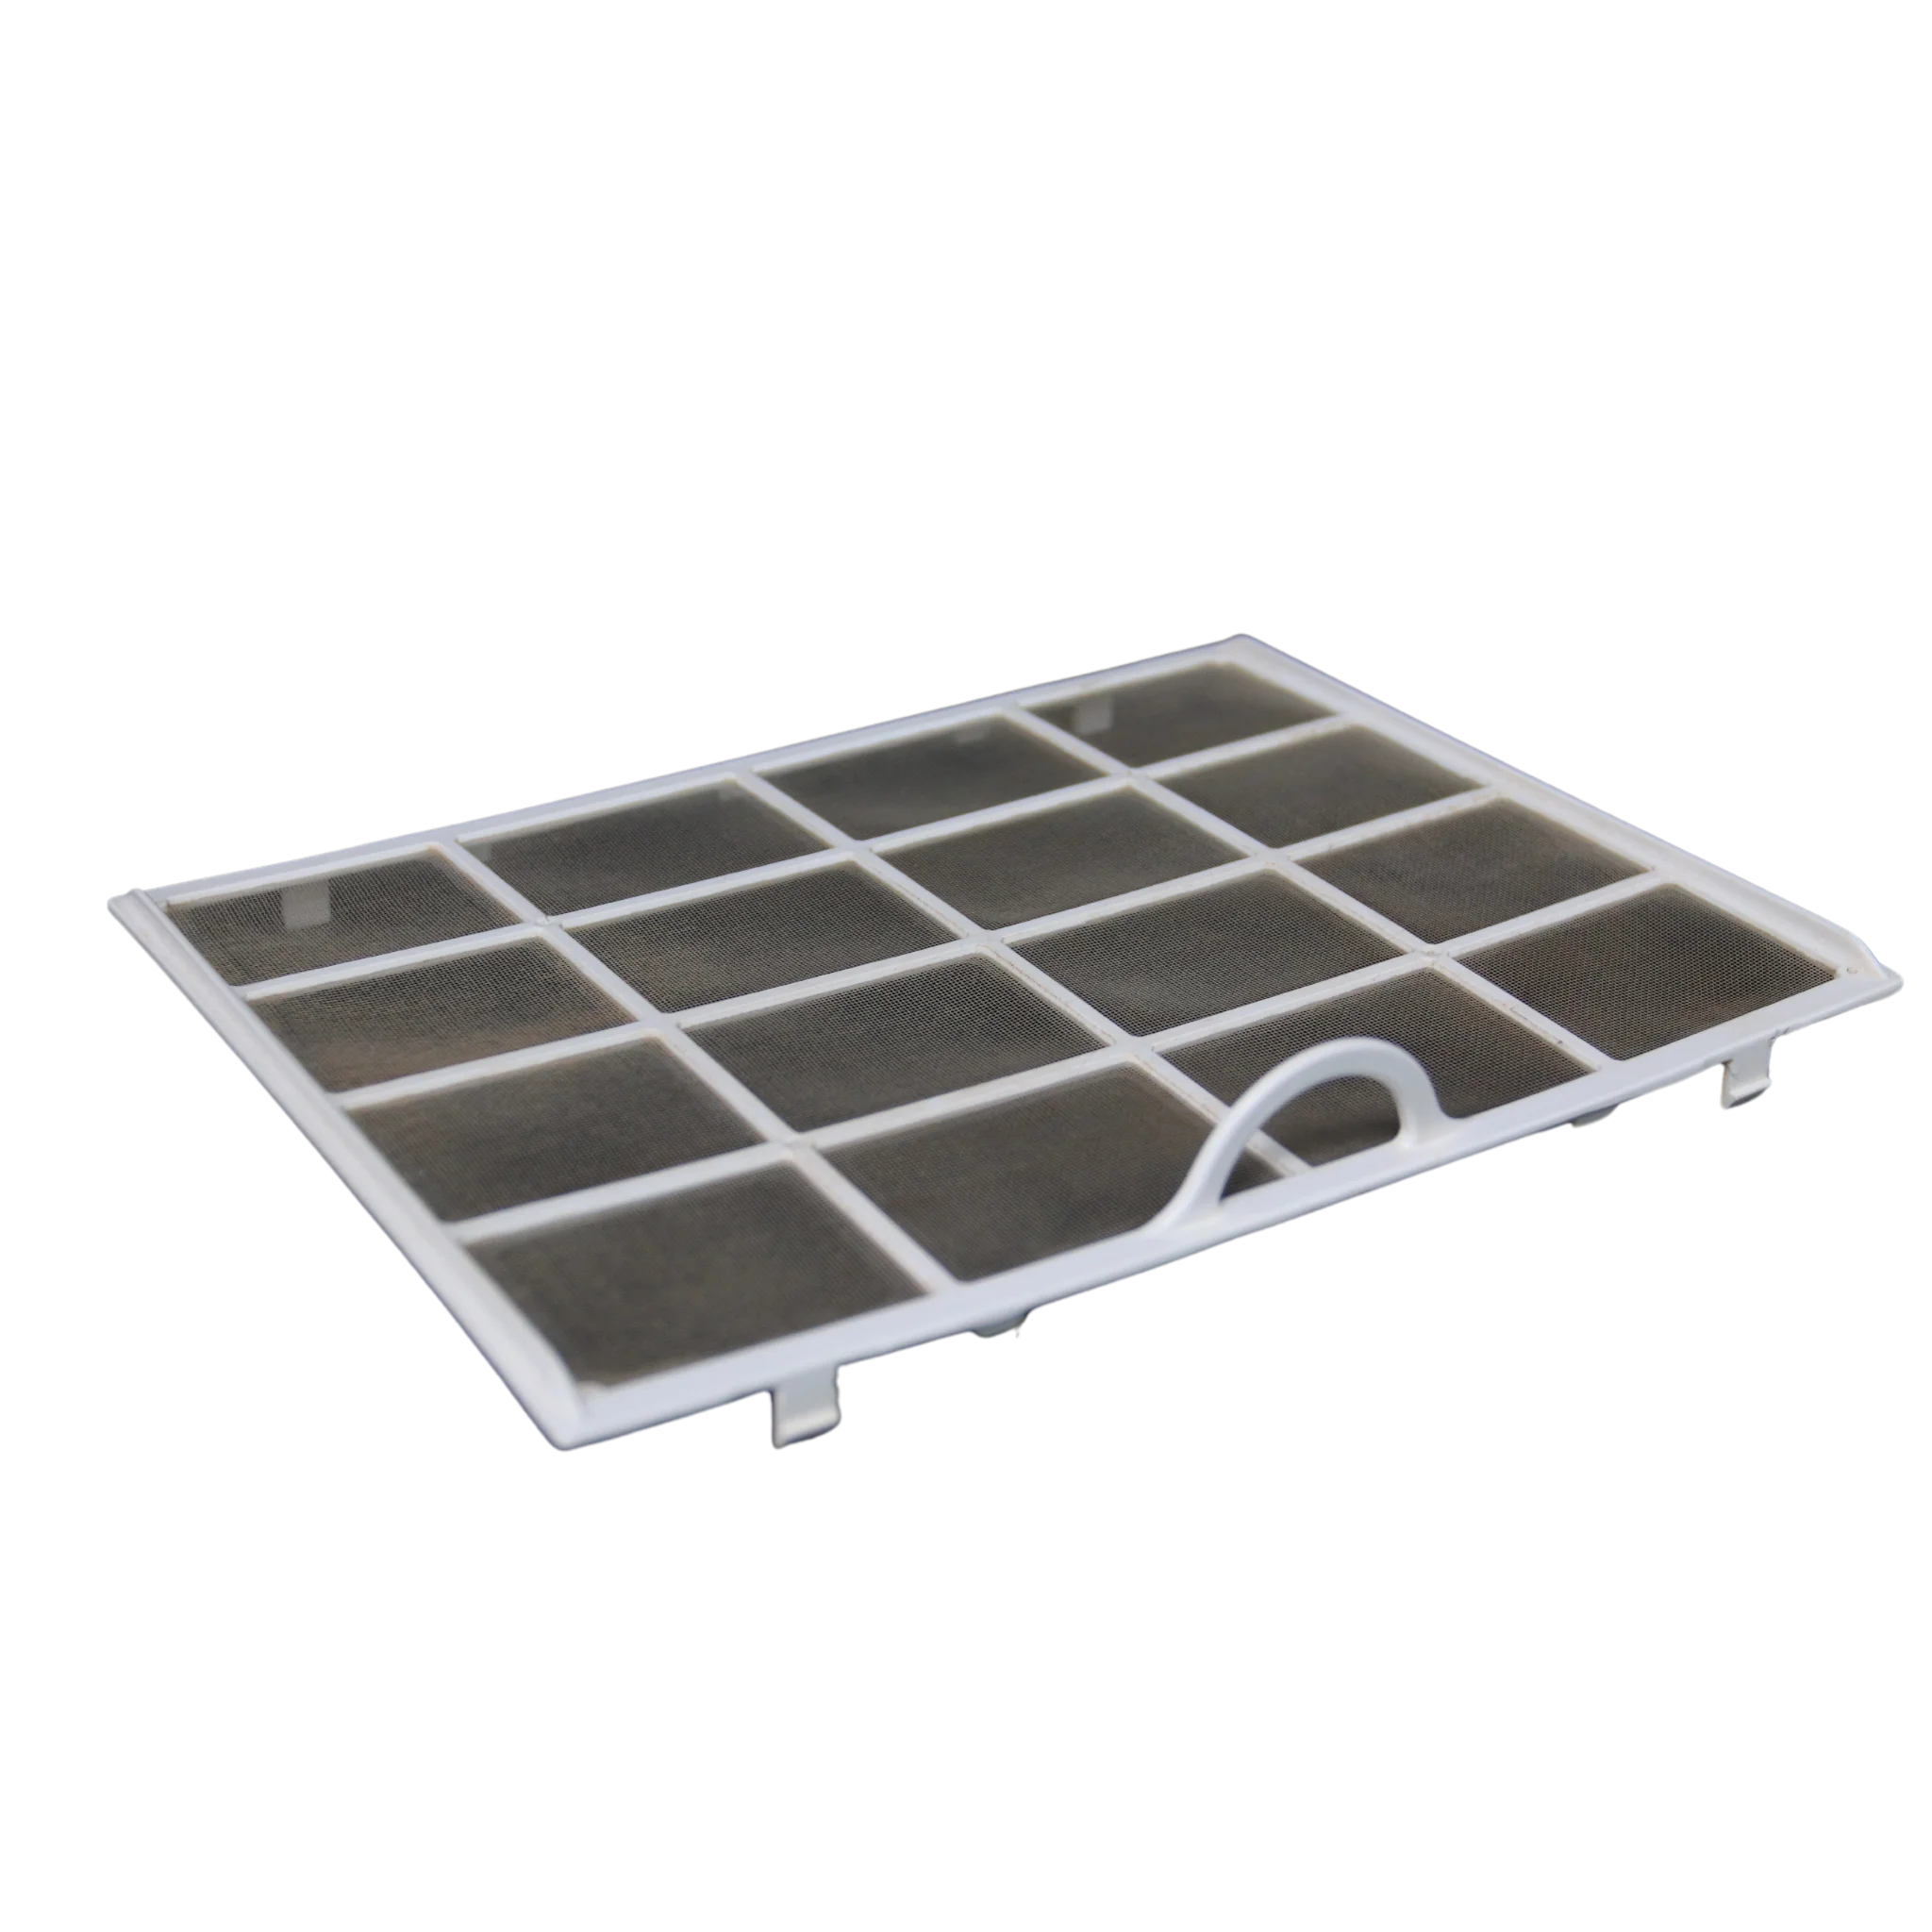 A photo of the Senelux Dust Filter with a light grey mesh seperateed into 16 panels by clean, white plastic